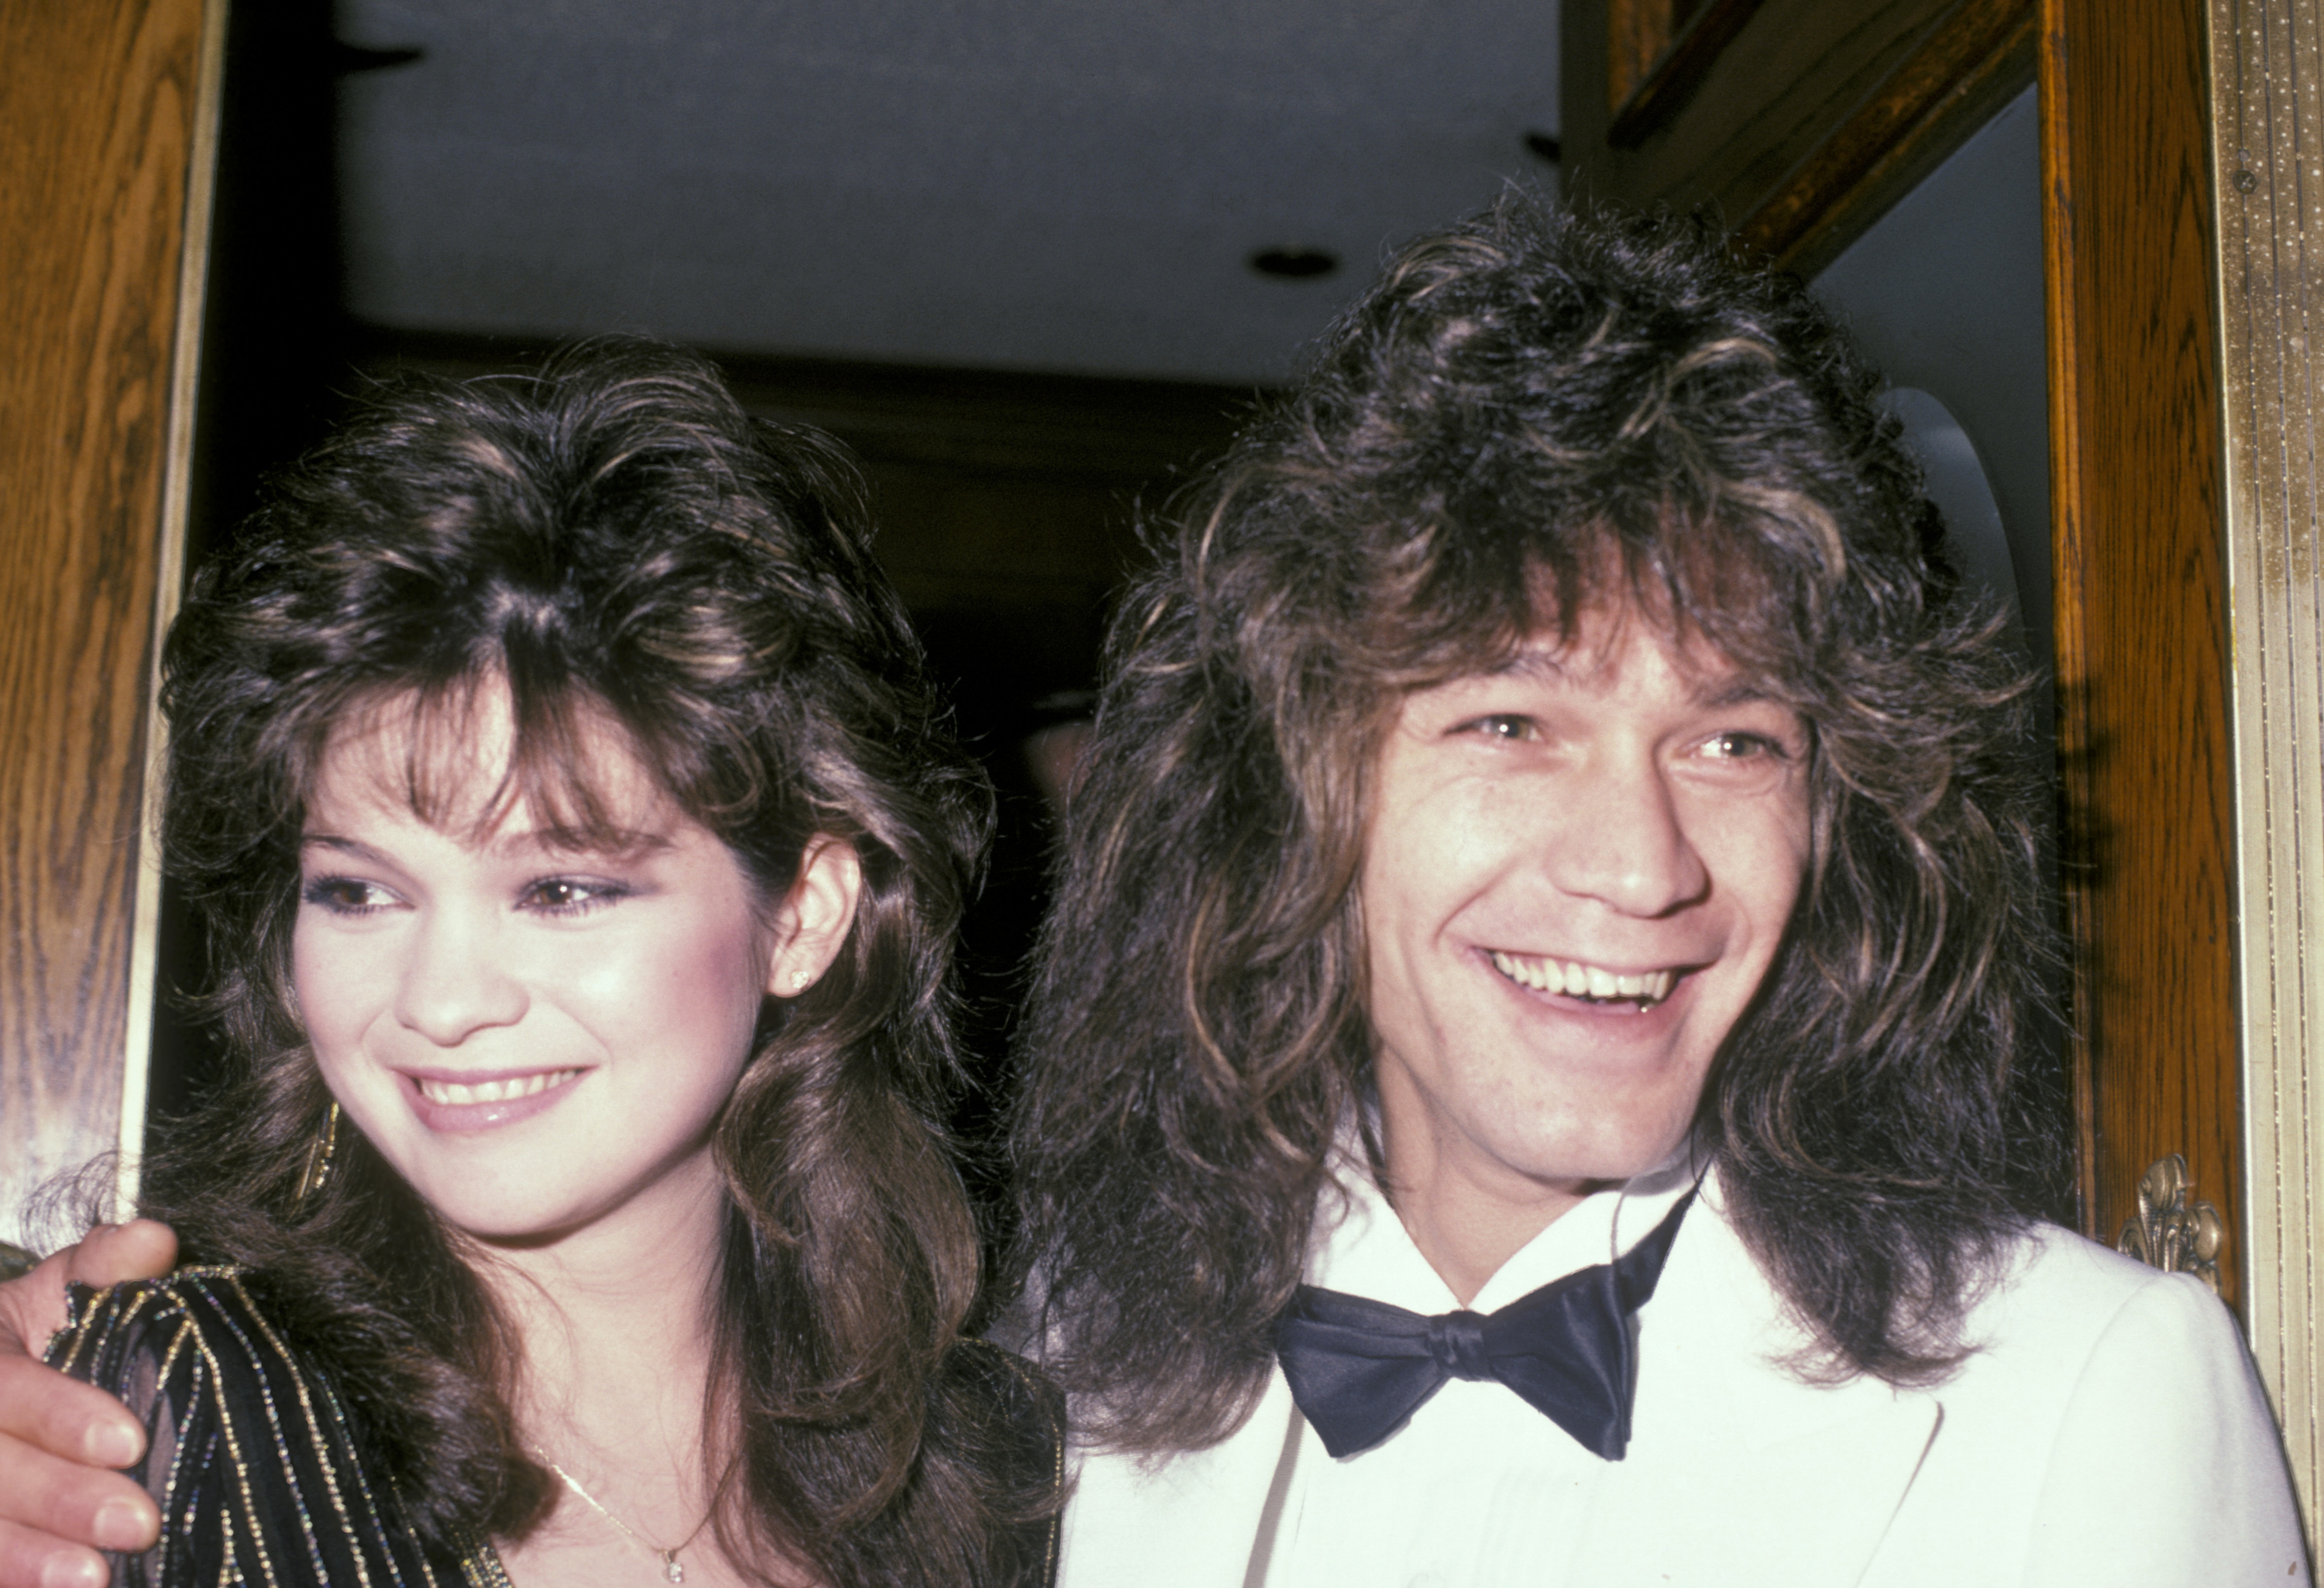 Valerie Bertinelli and Eddie Van Halen at the wrap party For "One Day At A Time" at Chasen's Restaurant in Beverly Hills, California. | Source: Getty Images